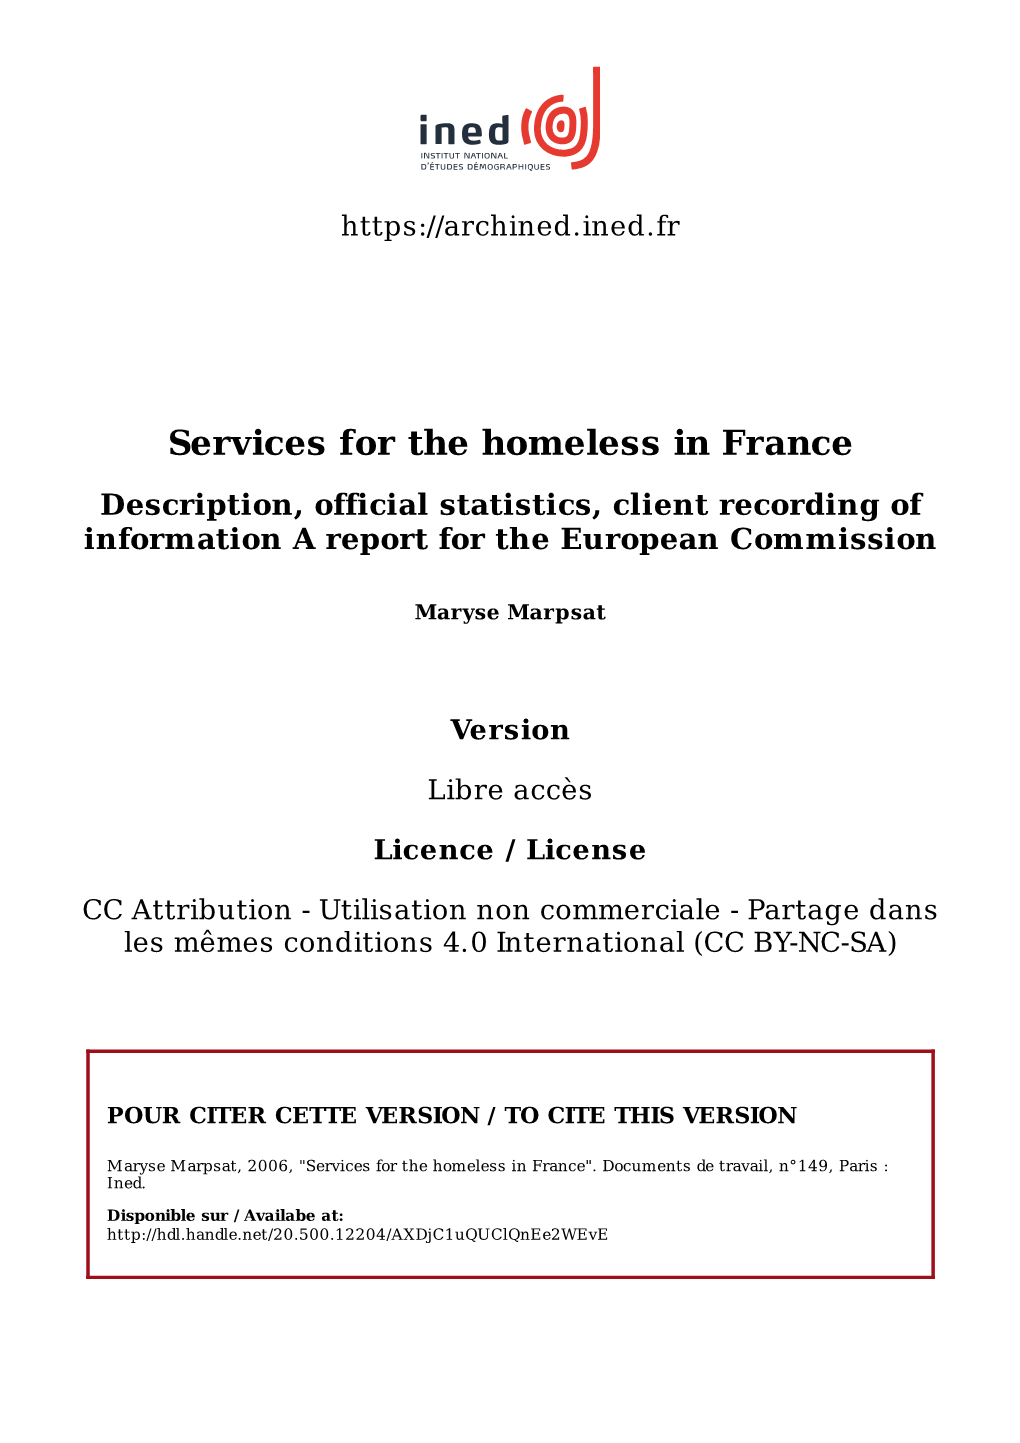 Services for the Homeless in France